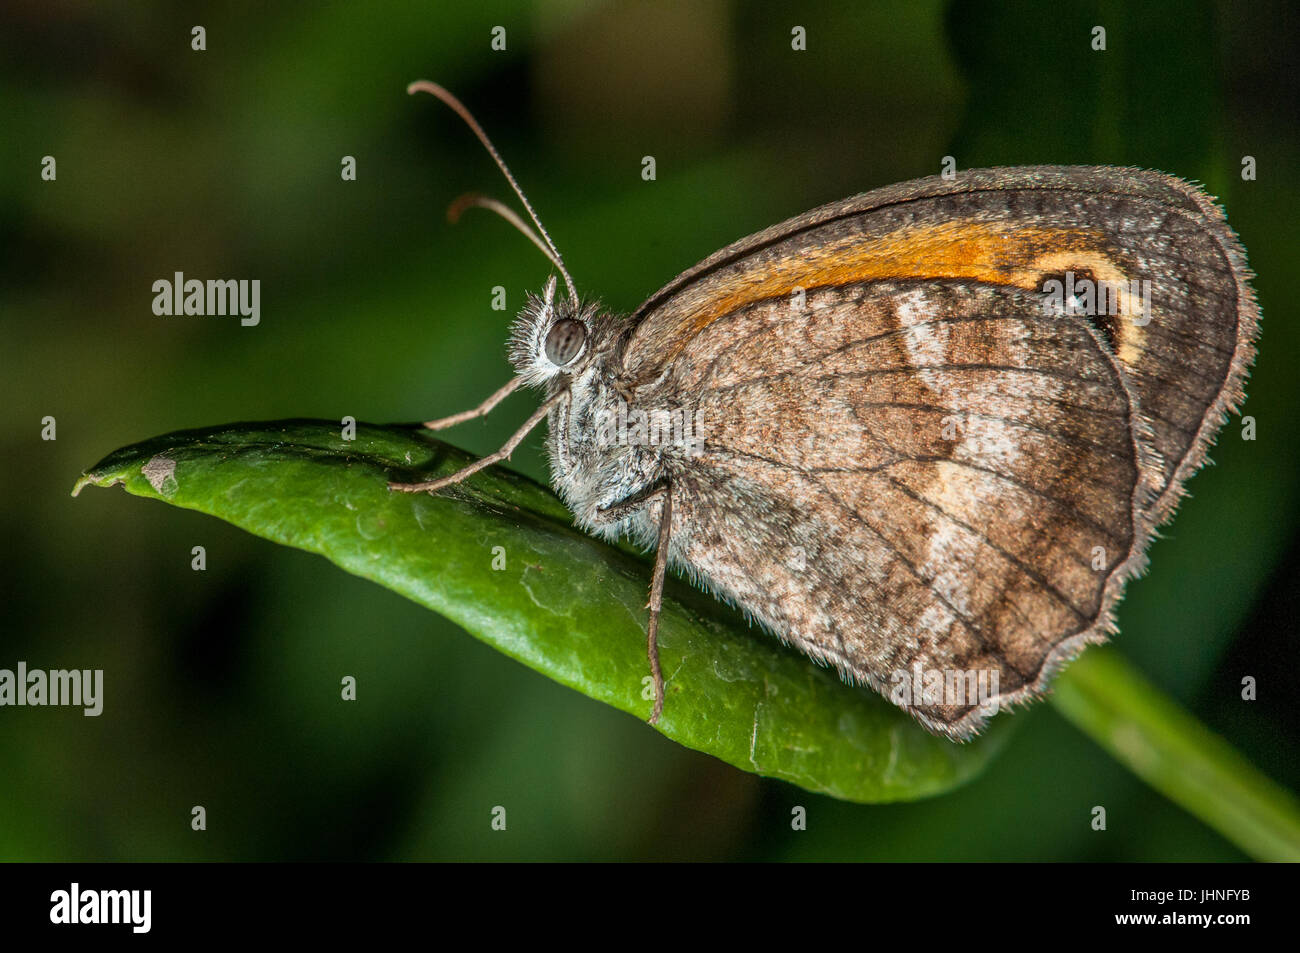 southern gatekeeper (Pyronia cecilia) on top of a green leaf Stock Photo